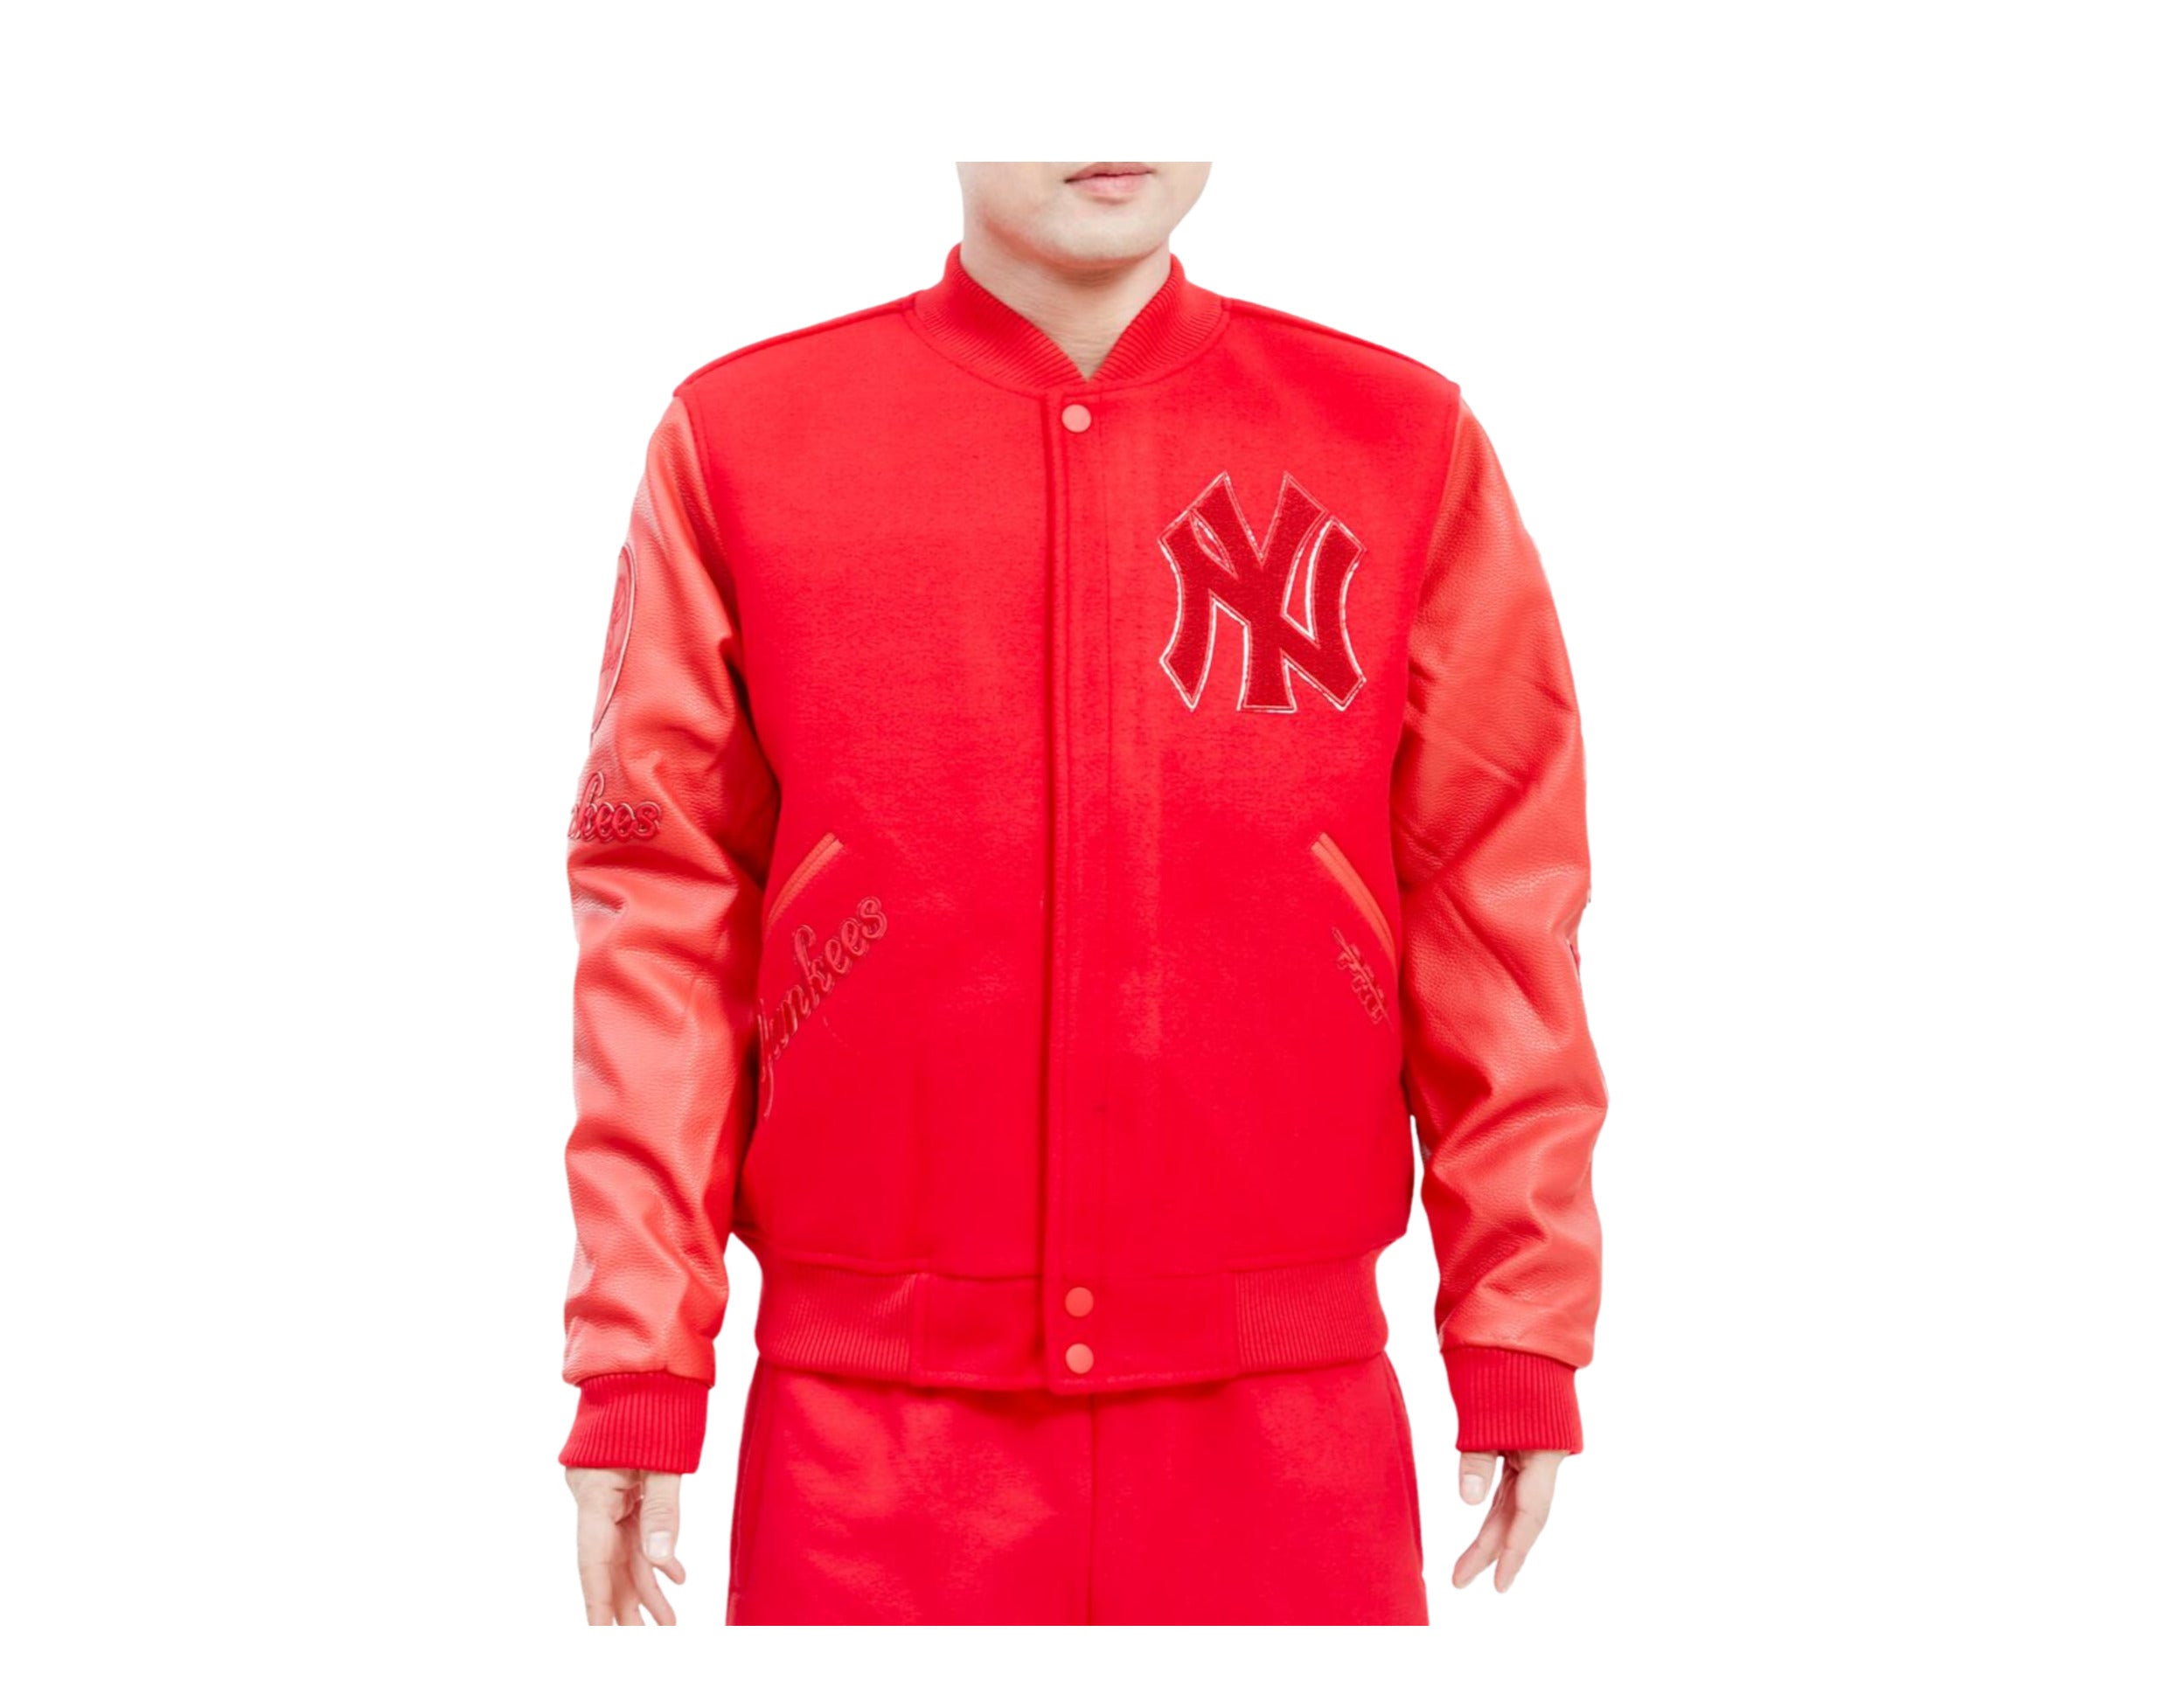 Red Jacket Mens MLB New York Yankees Distressed Style Shirt New L